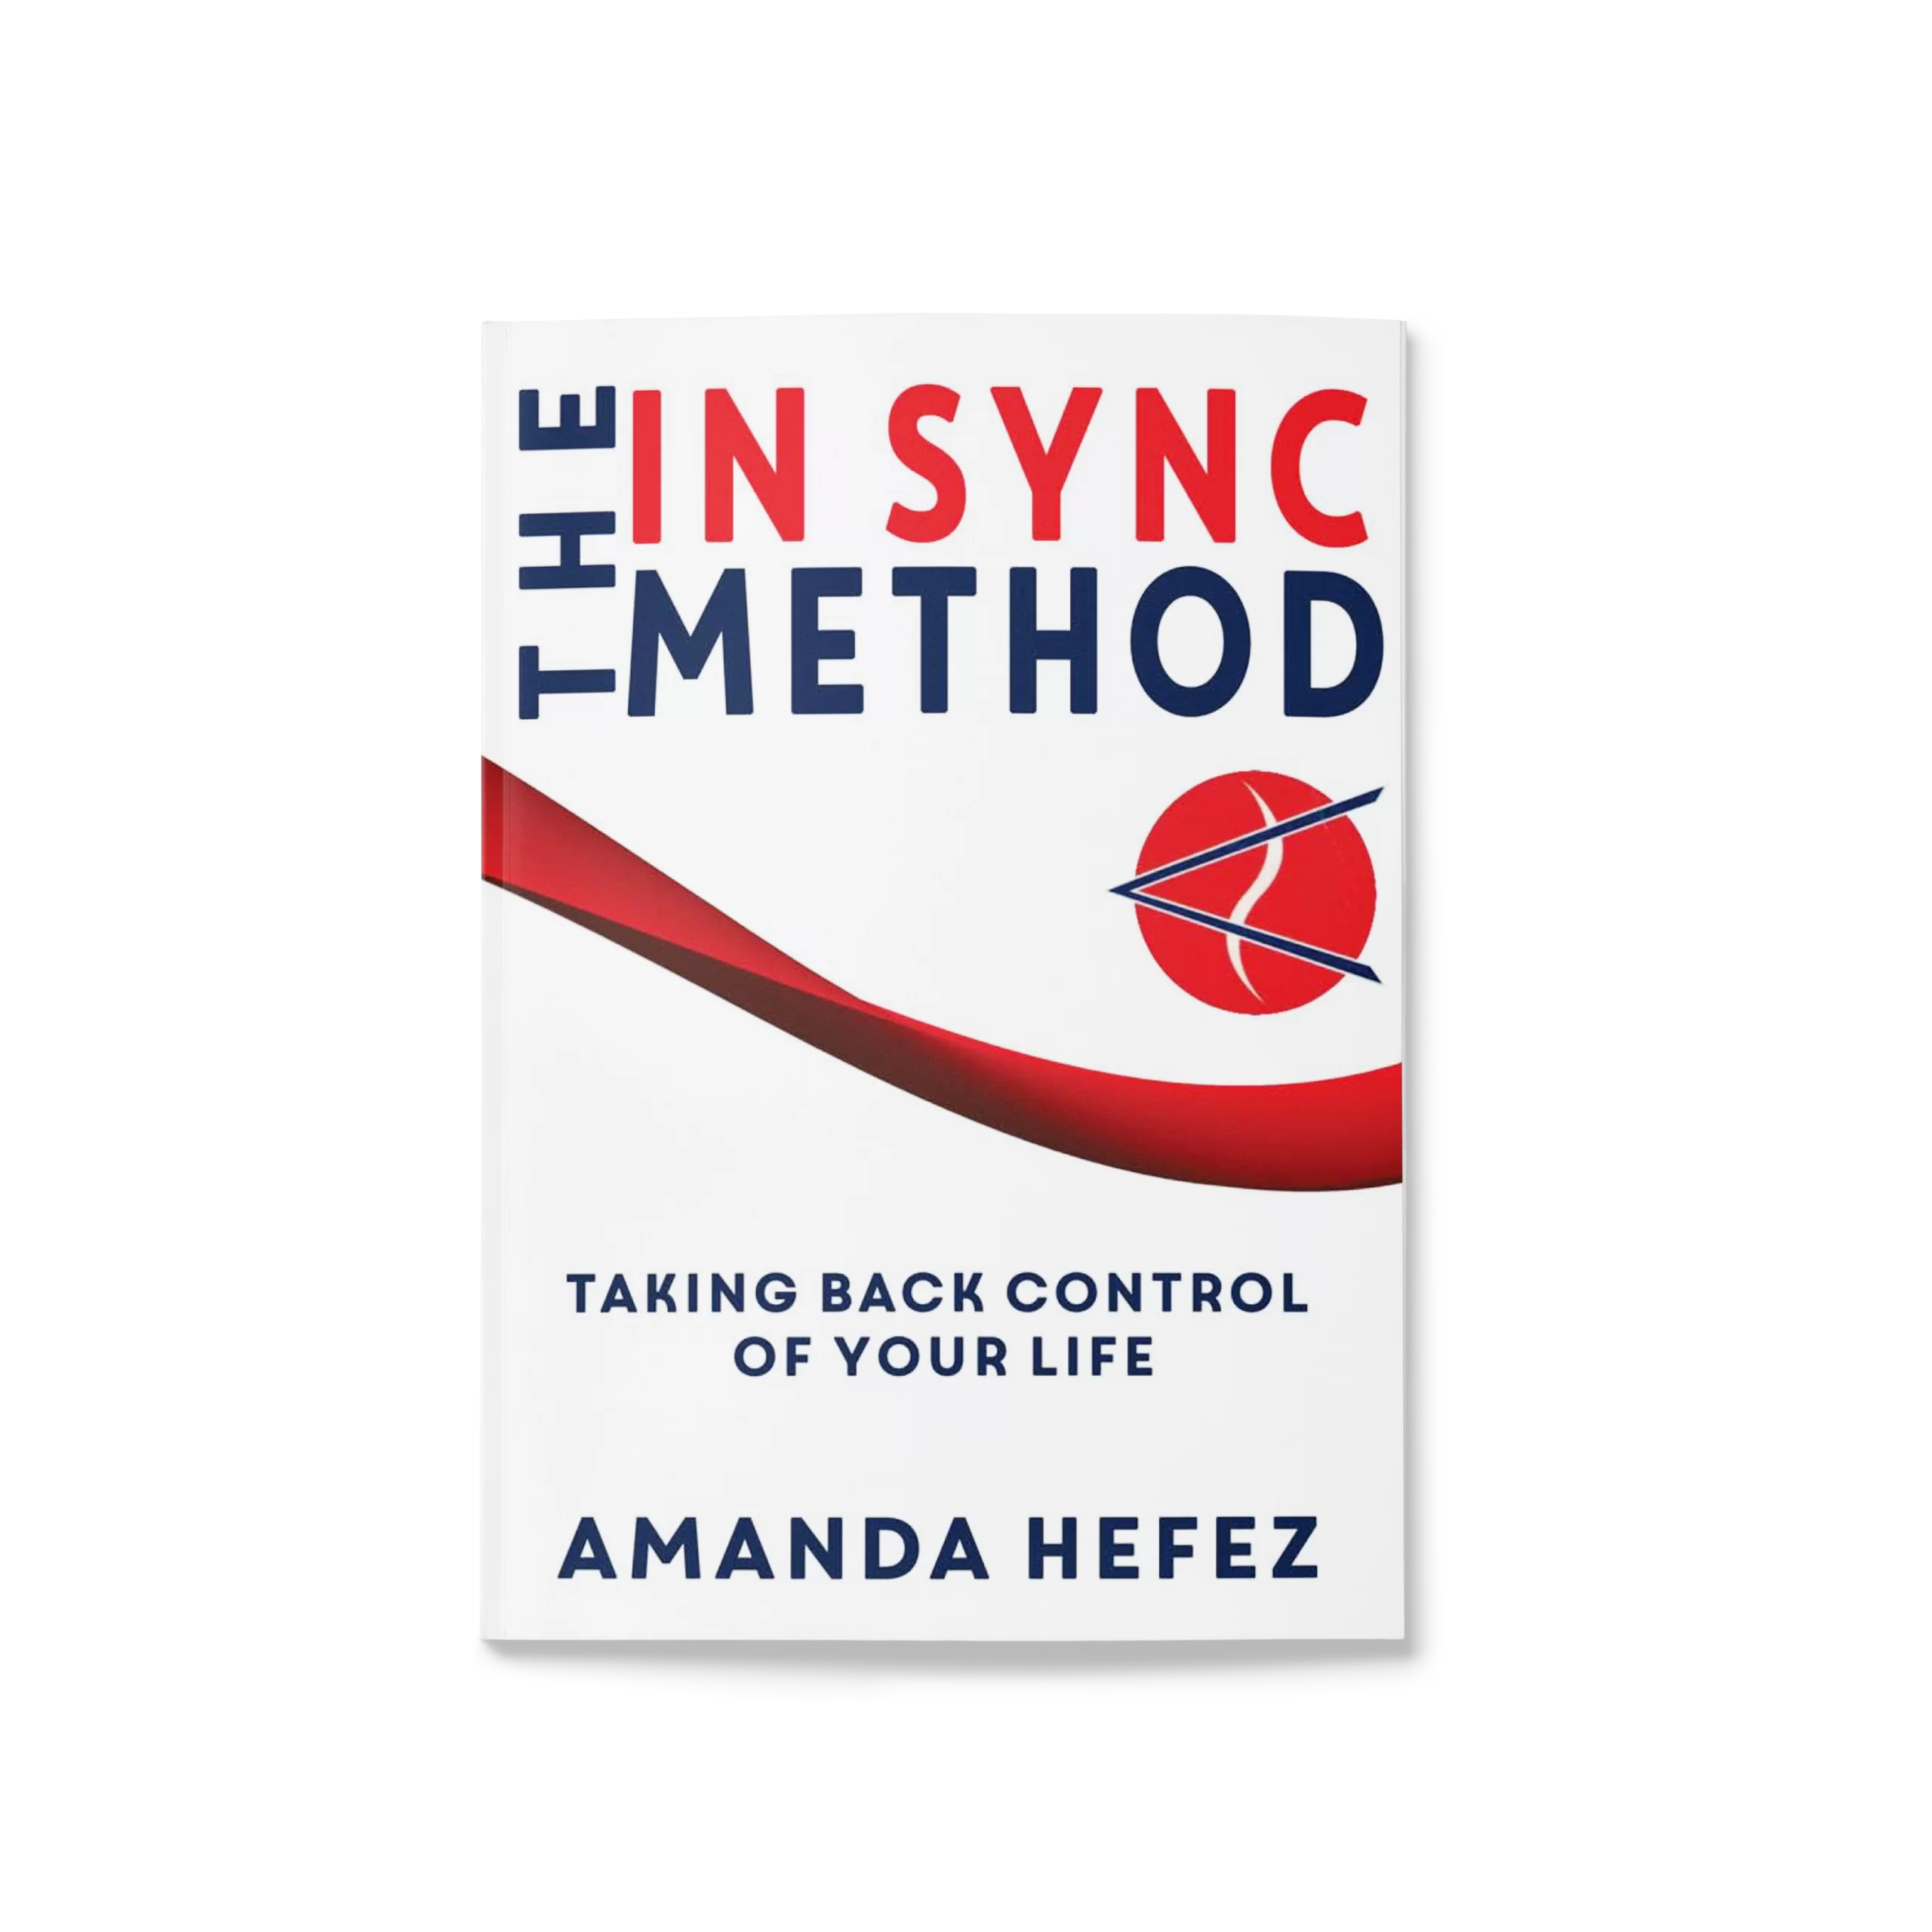 The In Sync Method front cover. Title "The In Sync Method" Subtitle "Taking Back Control Of Your Life" Author "Amanda Hefez". Colours used are vibrant red and deep navy on a white background.